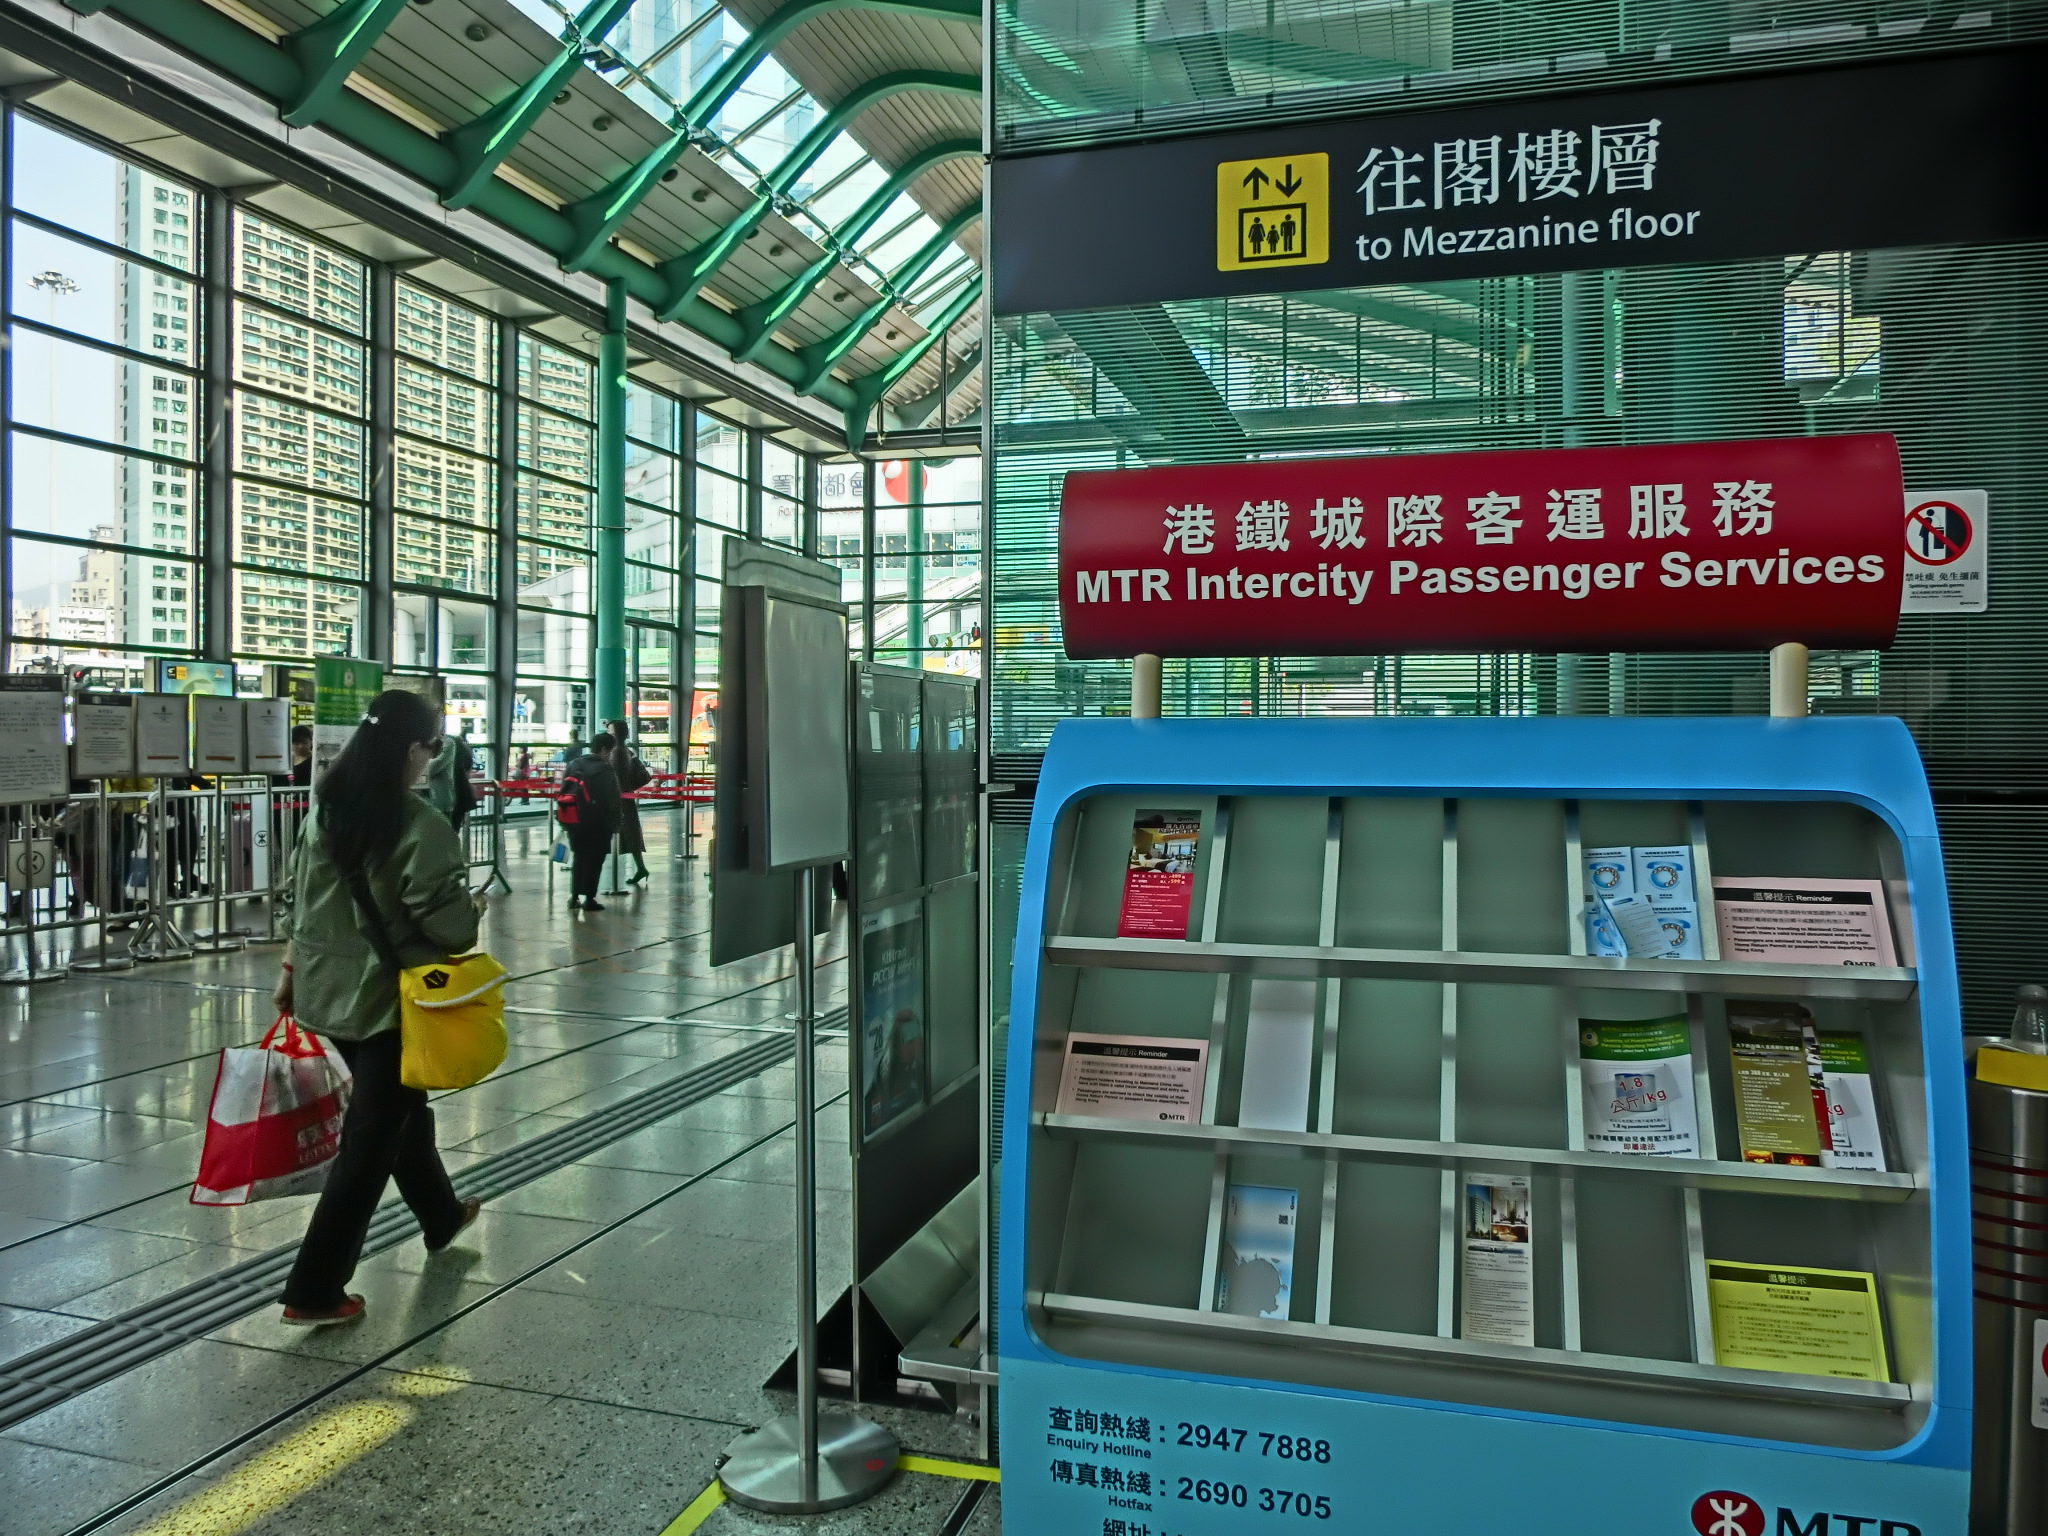 File Hk Hung Hom Mtr Station 城際直通車 Intercity Through Train Passenger Services Sign Mar 13 Jpg Wikimedia Commons